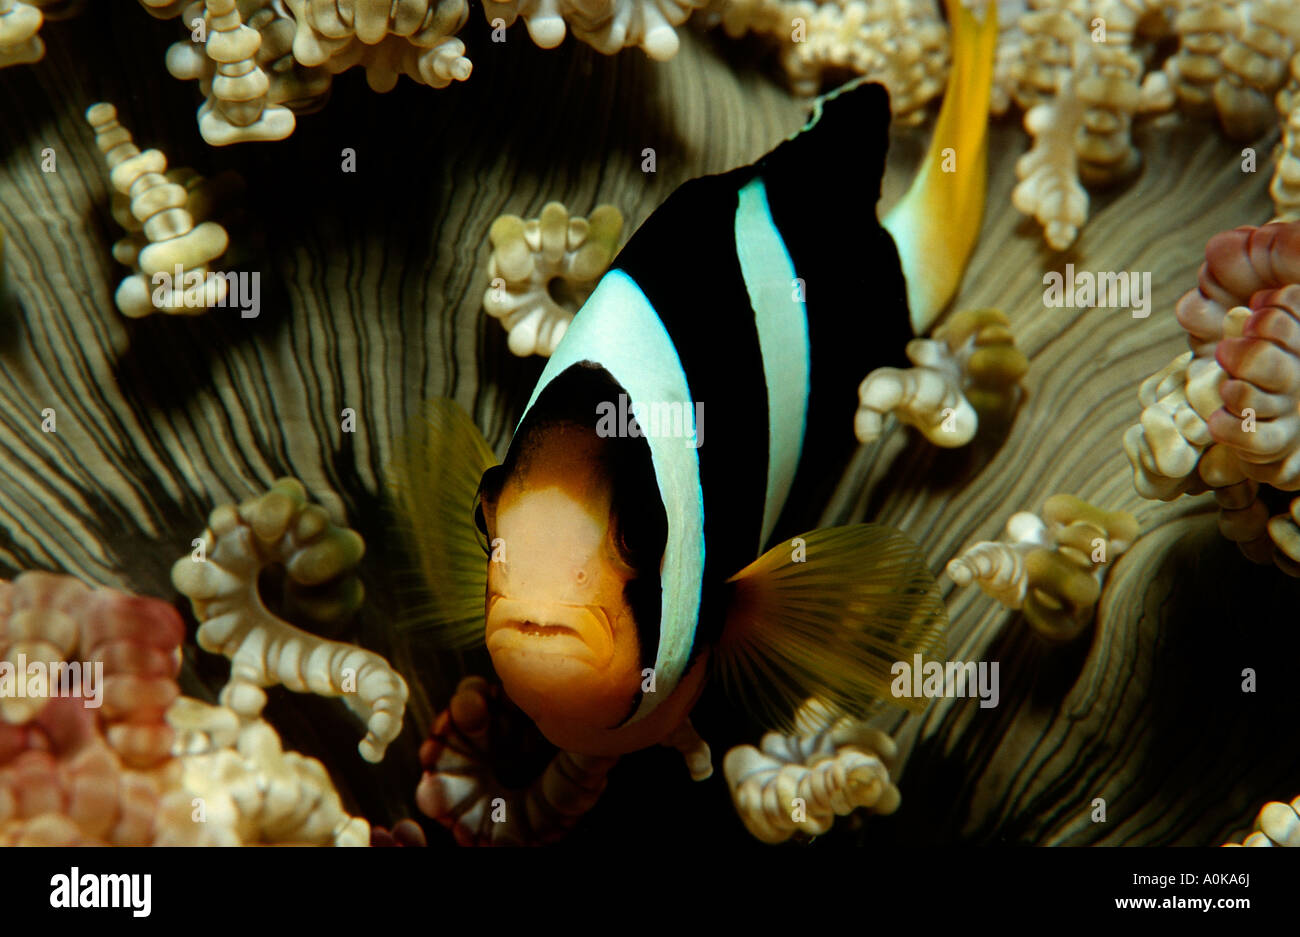 Clarks Anemone fish Amphiprion clarkii Indian Ocean Maldives Island Stock Photo